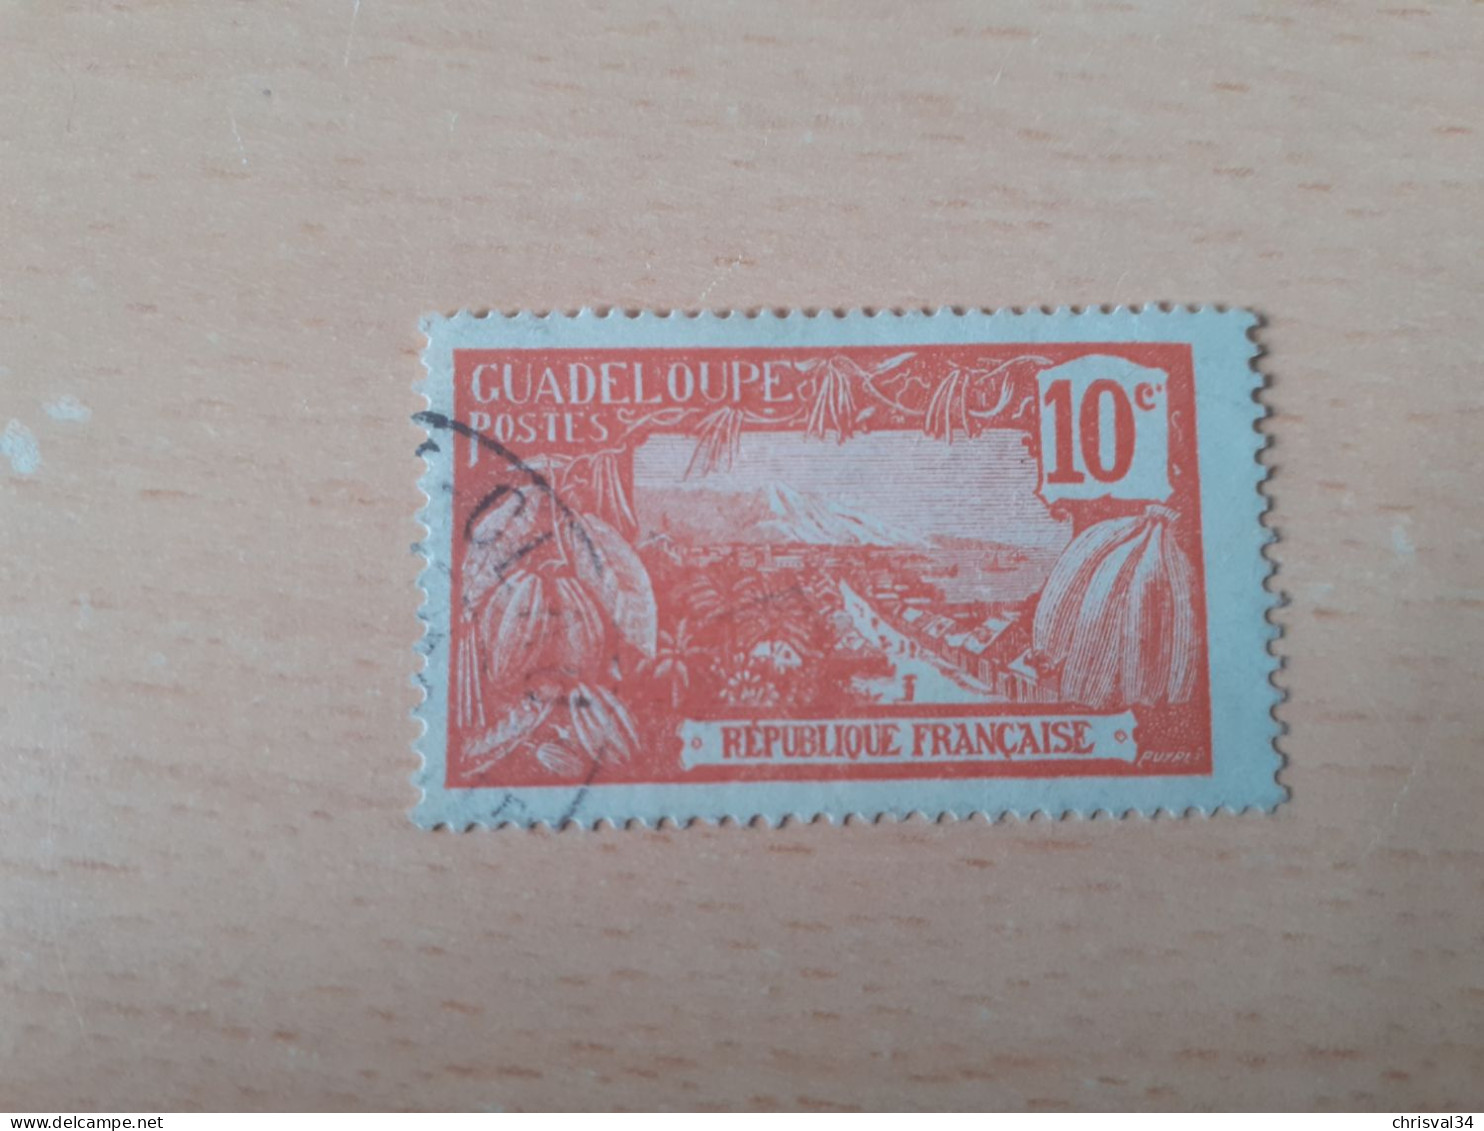 TIMBRE   GUADELOUPE       N  79     COTE  0,25   EUROS  OBLITERE - Gebruikt